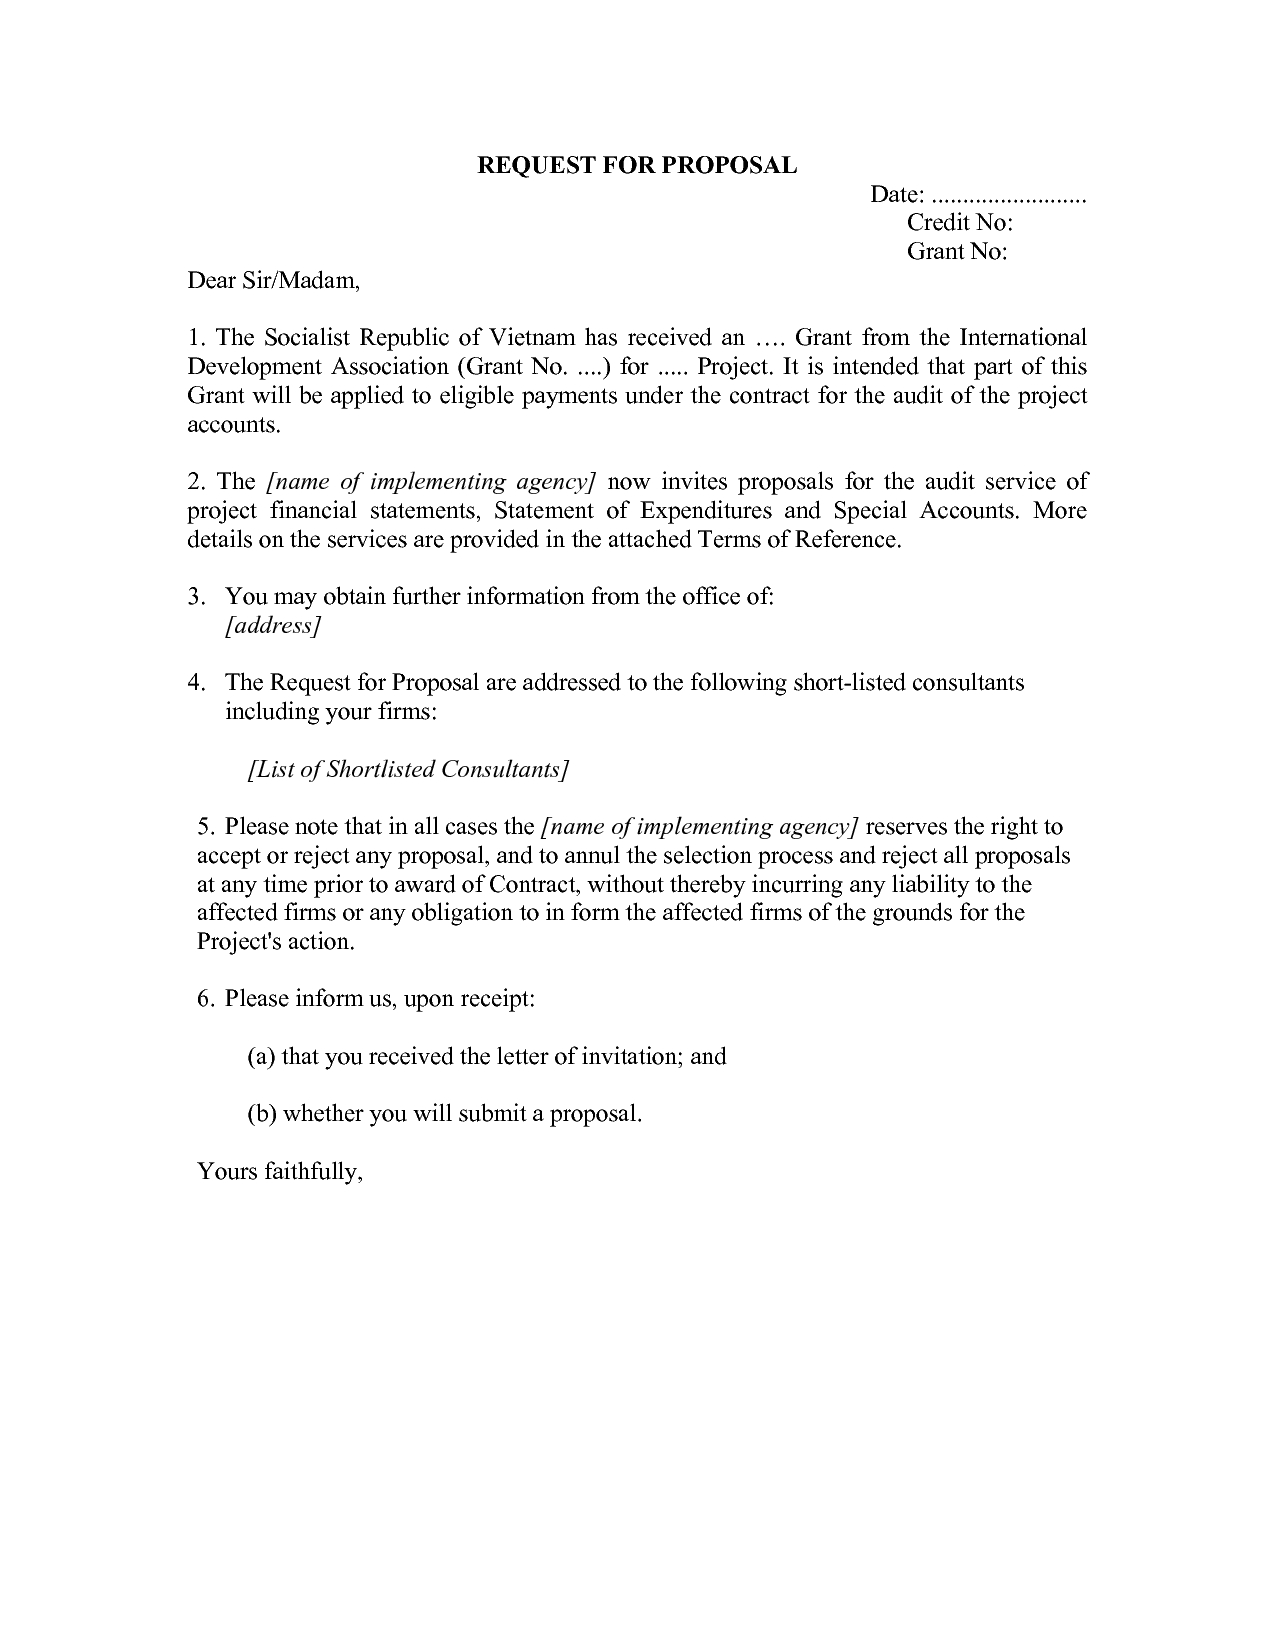 Sample Proposal Letter To A Client Letter Sample Proposal inside proportions 1275 X 1650